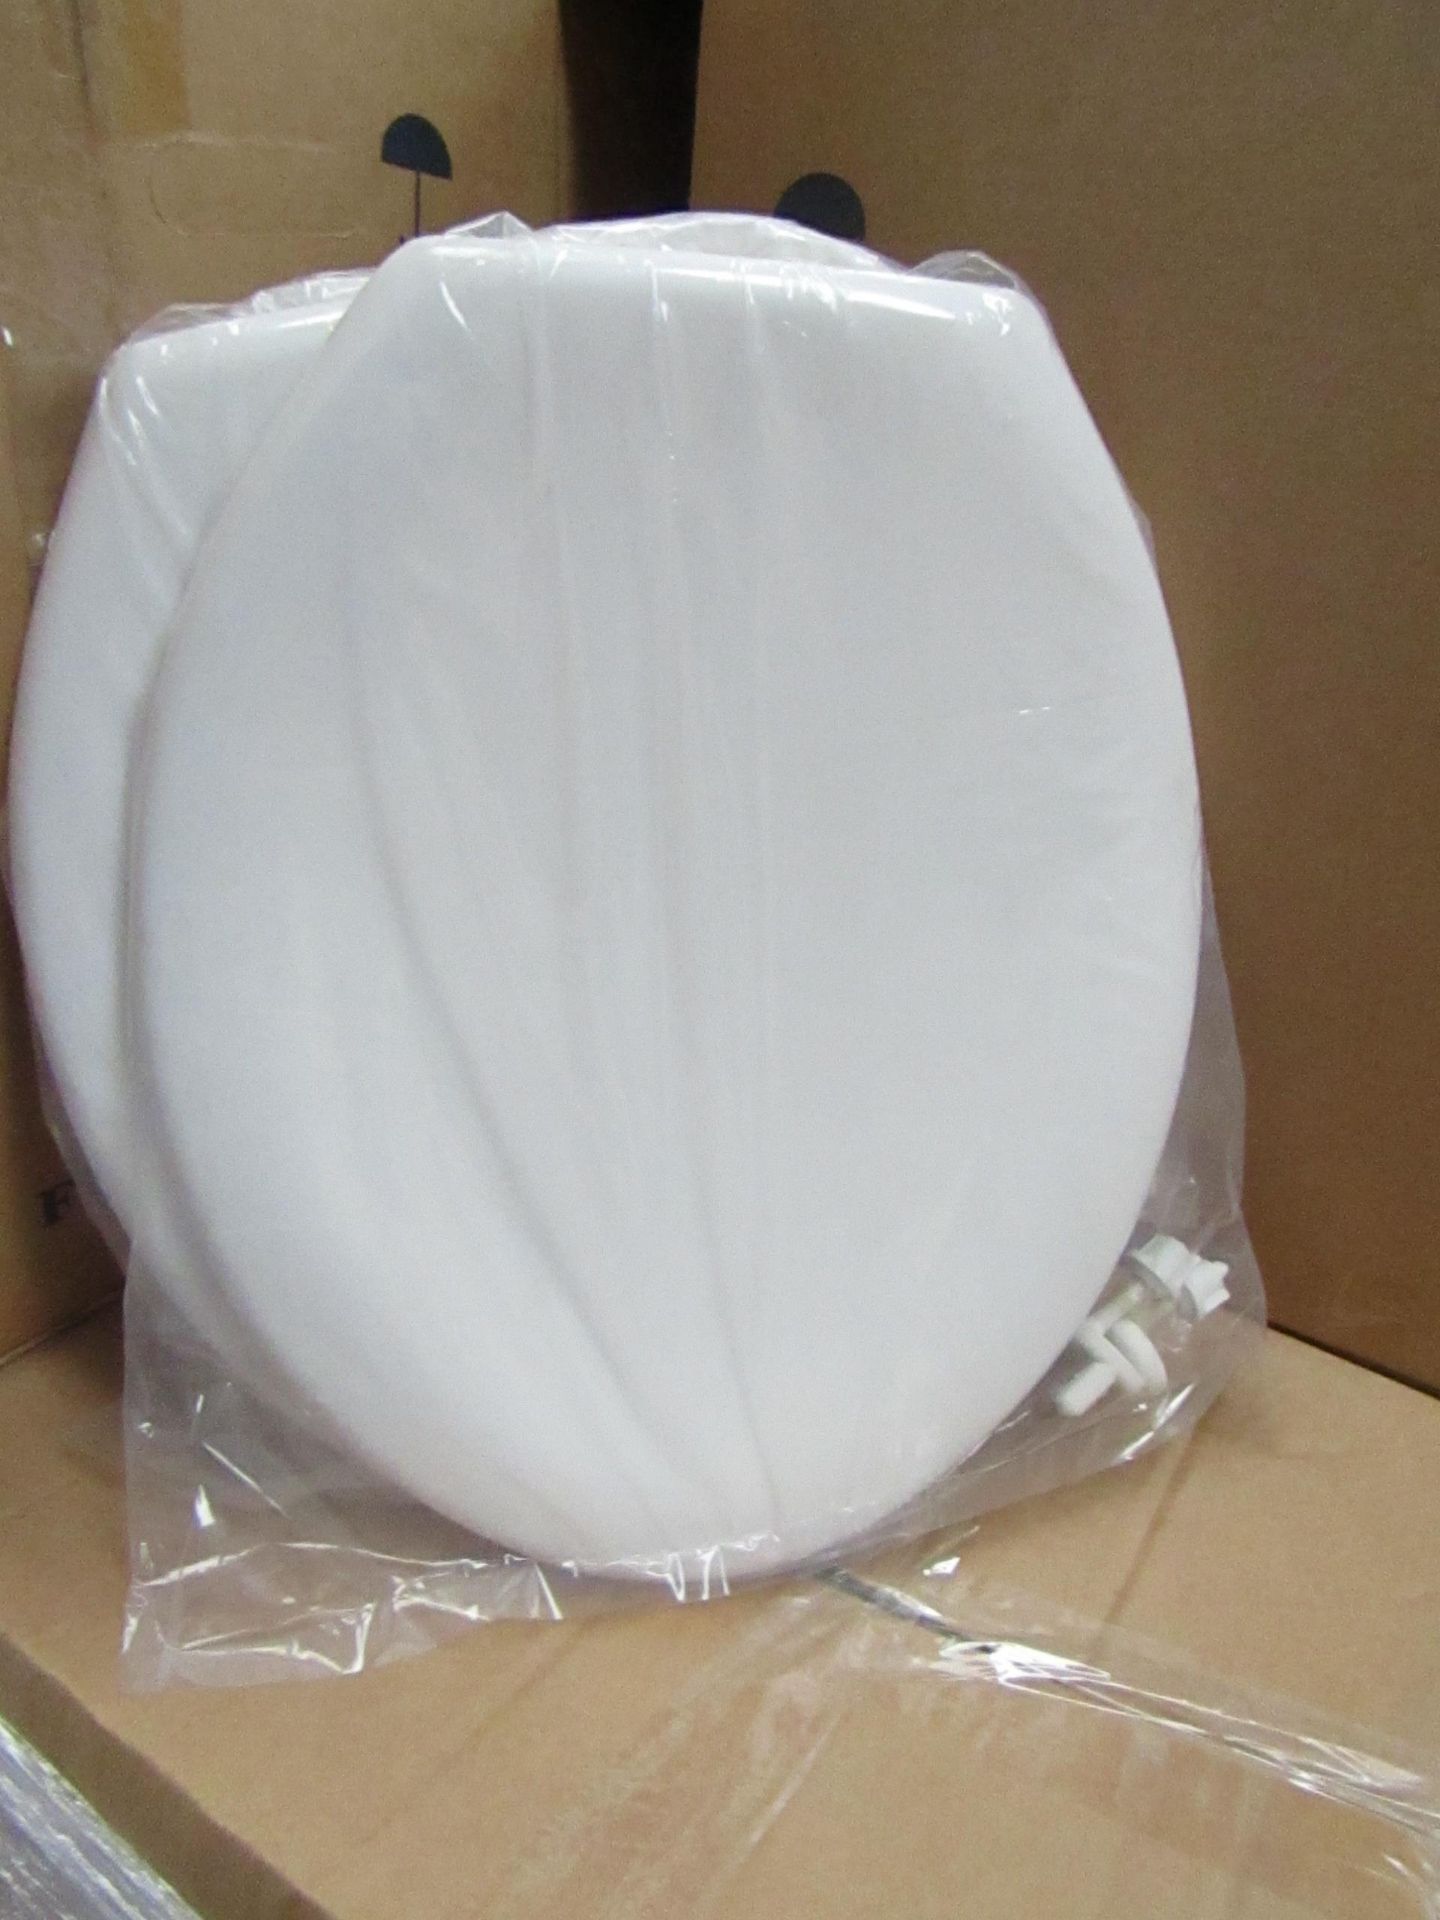 5 x Unbranded Toilet seats, unused and individually bagged with hinges, more may be available to the